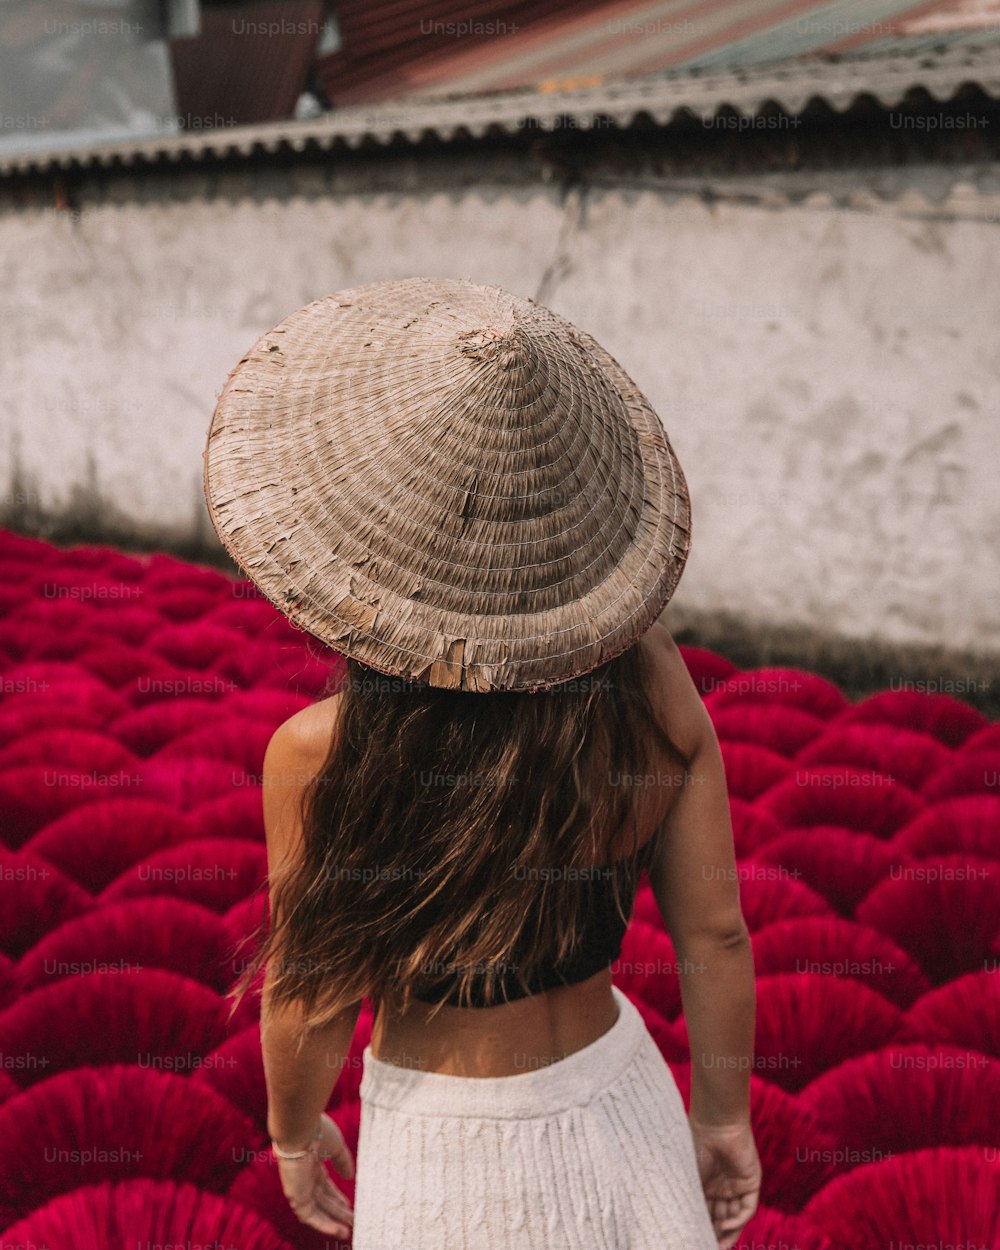 a woman in a straw hat walking through a field of red flowers